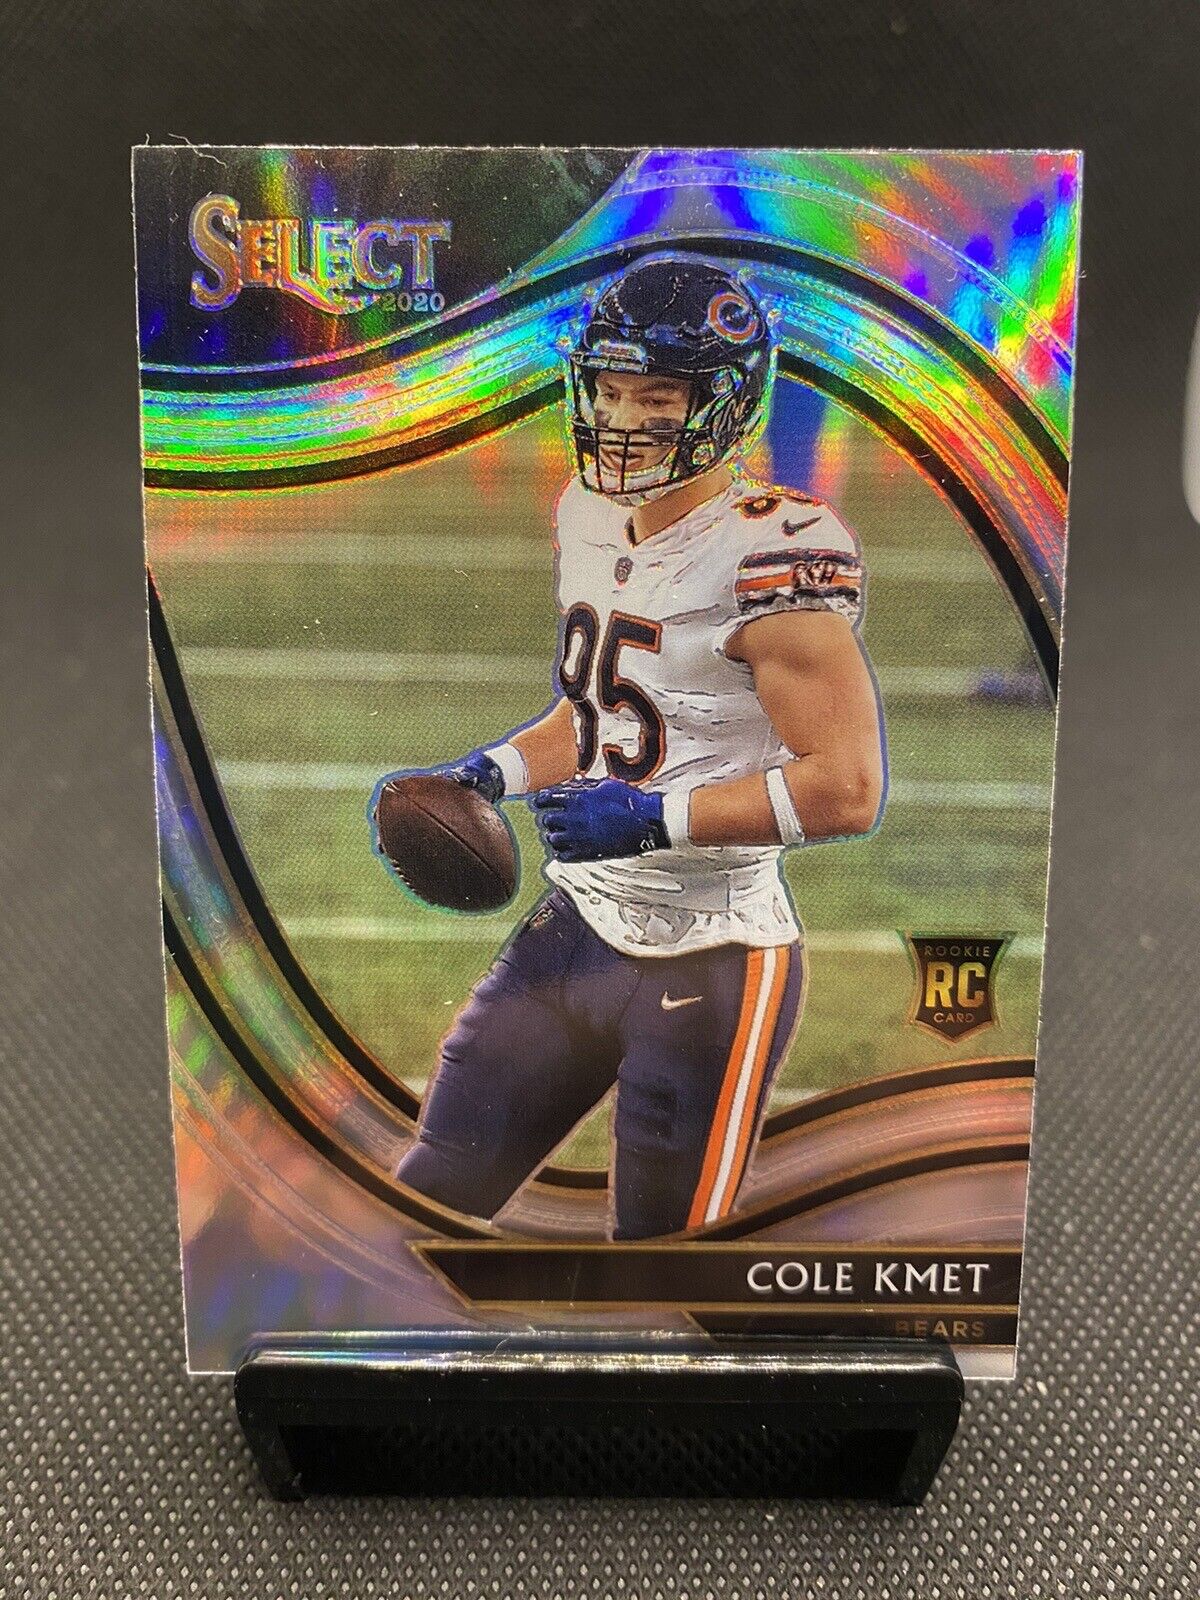 2020 COLE KMET Select Field Level Rookie Silver Prizm RC Chicago Bears